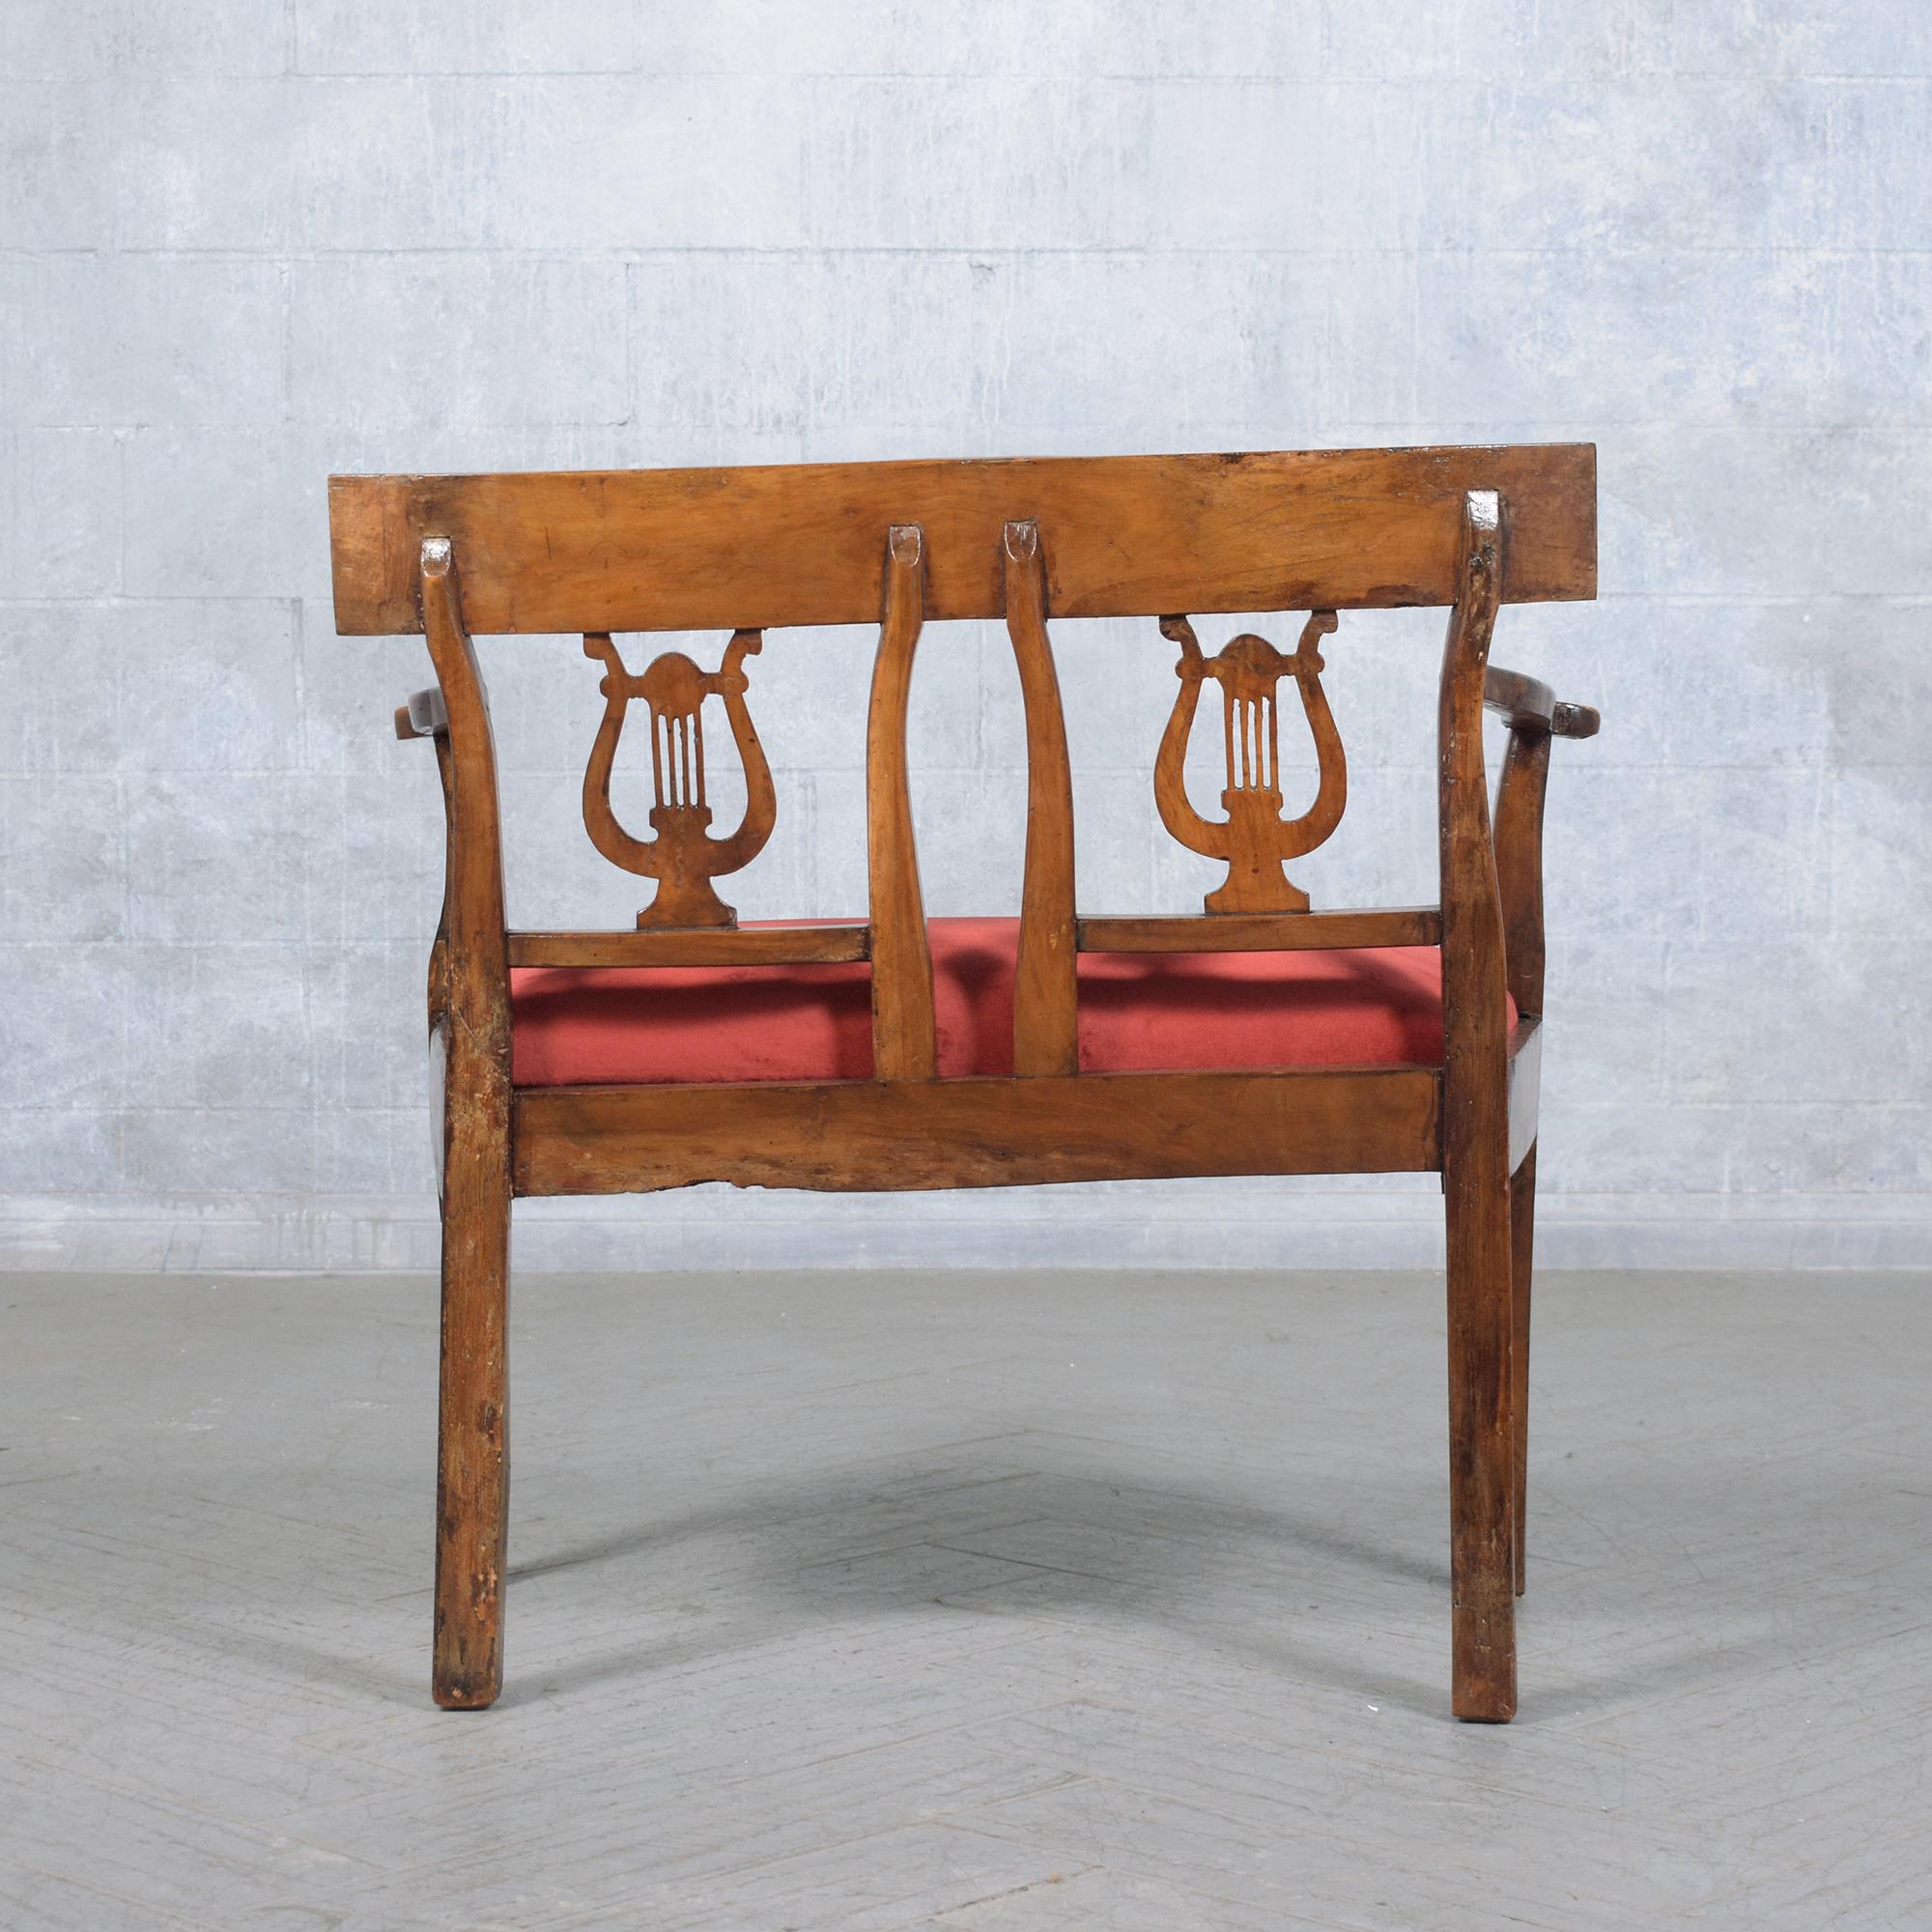 Restored Late 18th-Century English Walnut Bench with Harp Carvings For Sale 6